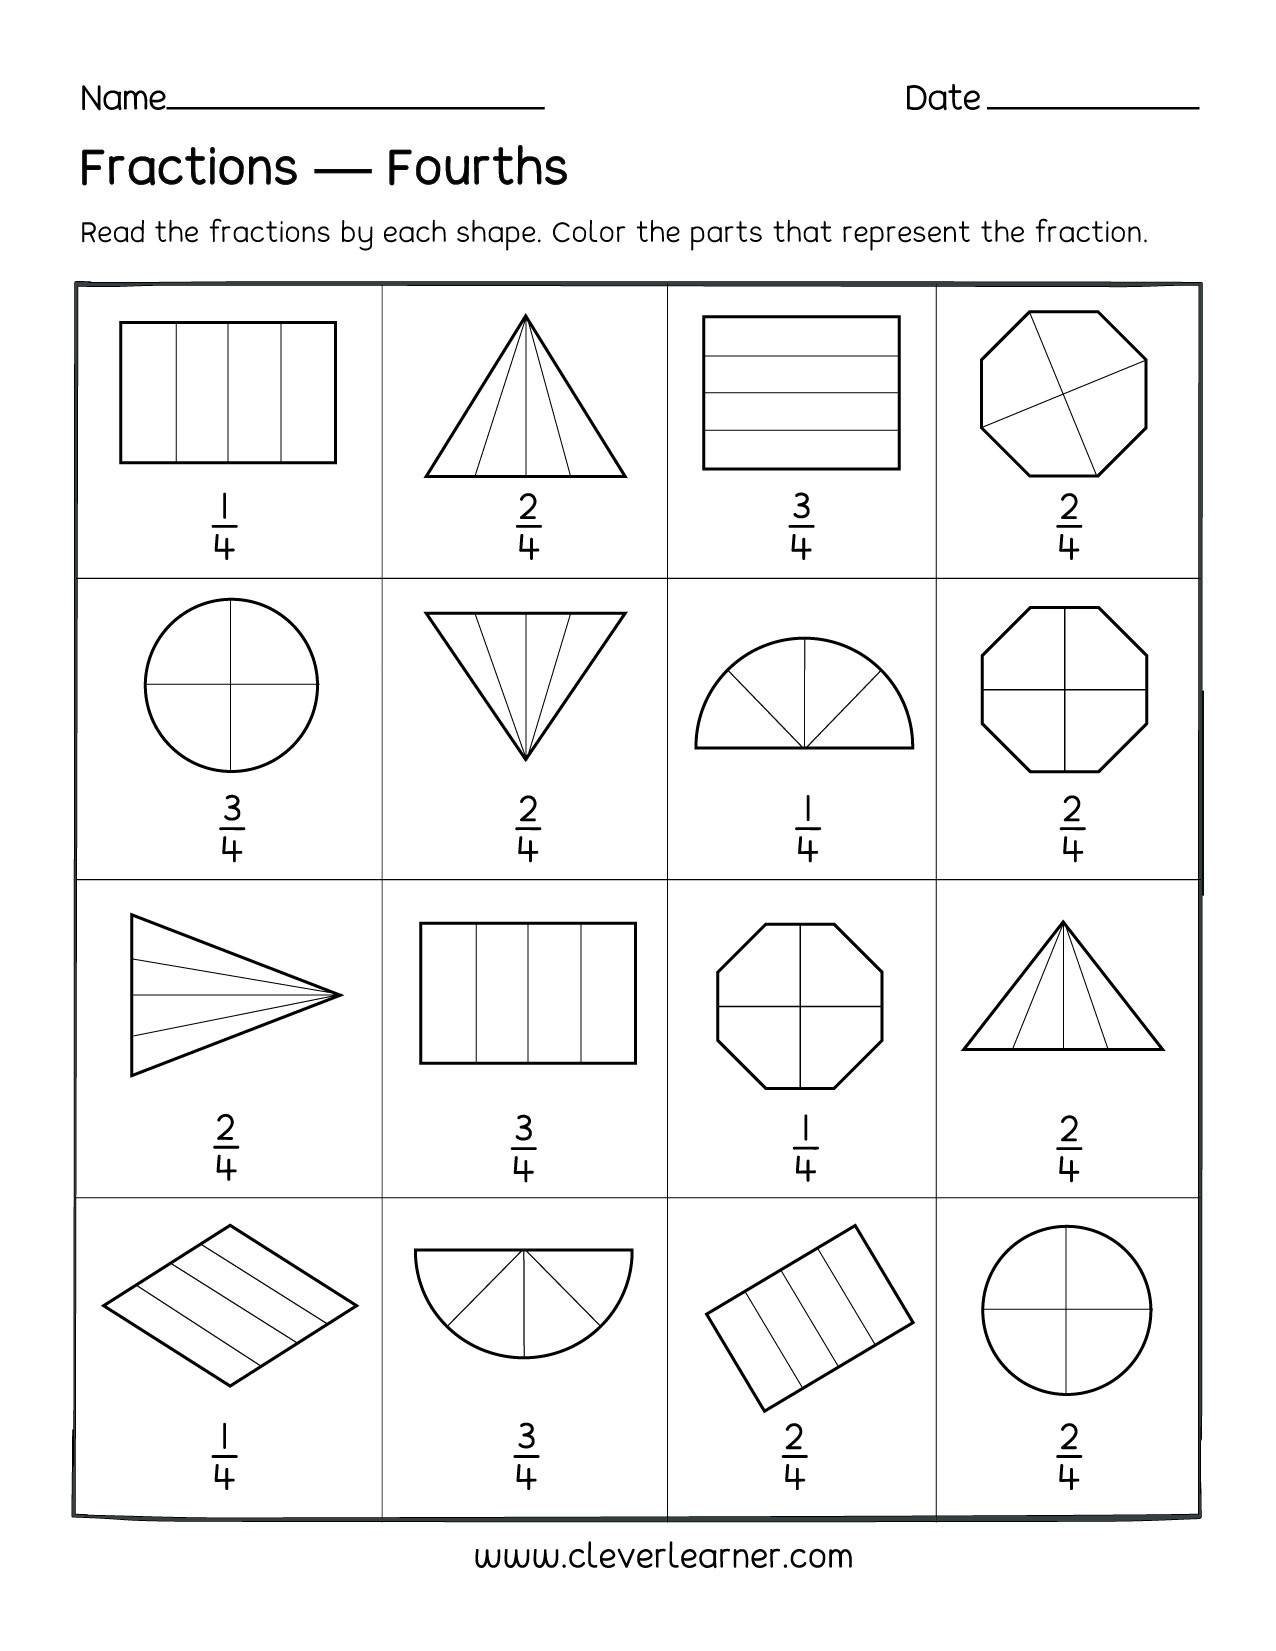 Fractions Worksheets First Grade Fun Activity On Fractions Fourths Worksheets for Children